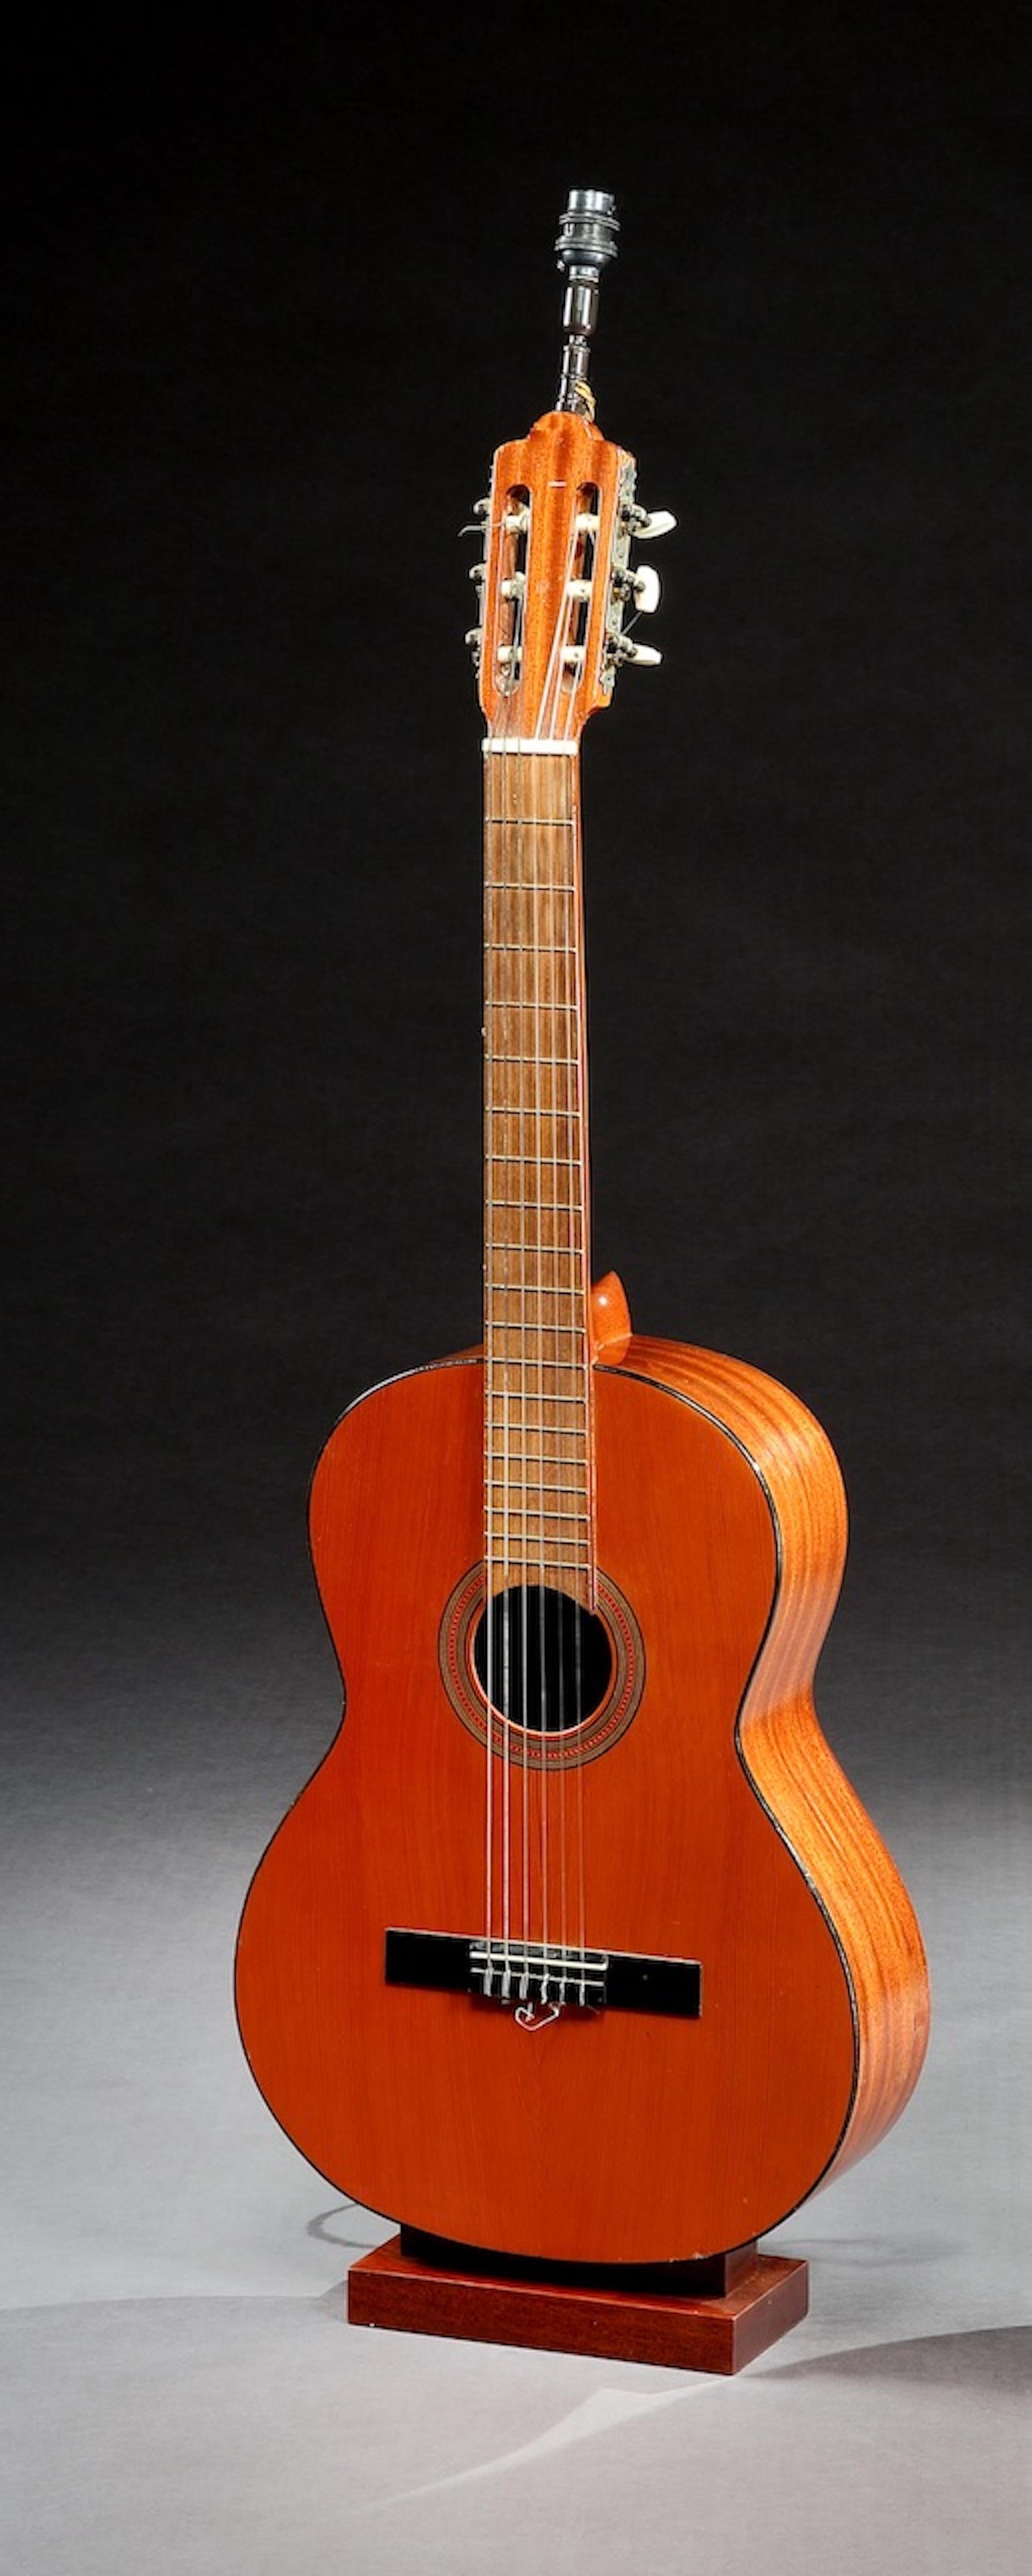 This full-size, classical, acoustic guitar is in a natural, multi-wooden finish and has a vibrant, exciting tone.
 
 Mahogany back and sides, rosewood fingerboard, solid spruce top. Linden laminate body, back, sides and neck. The body with classic